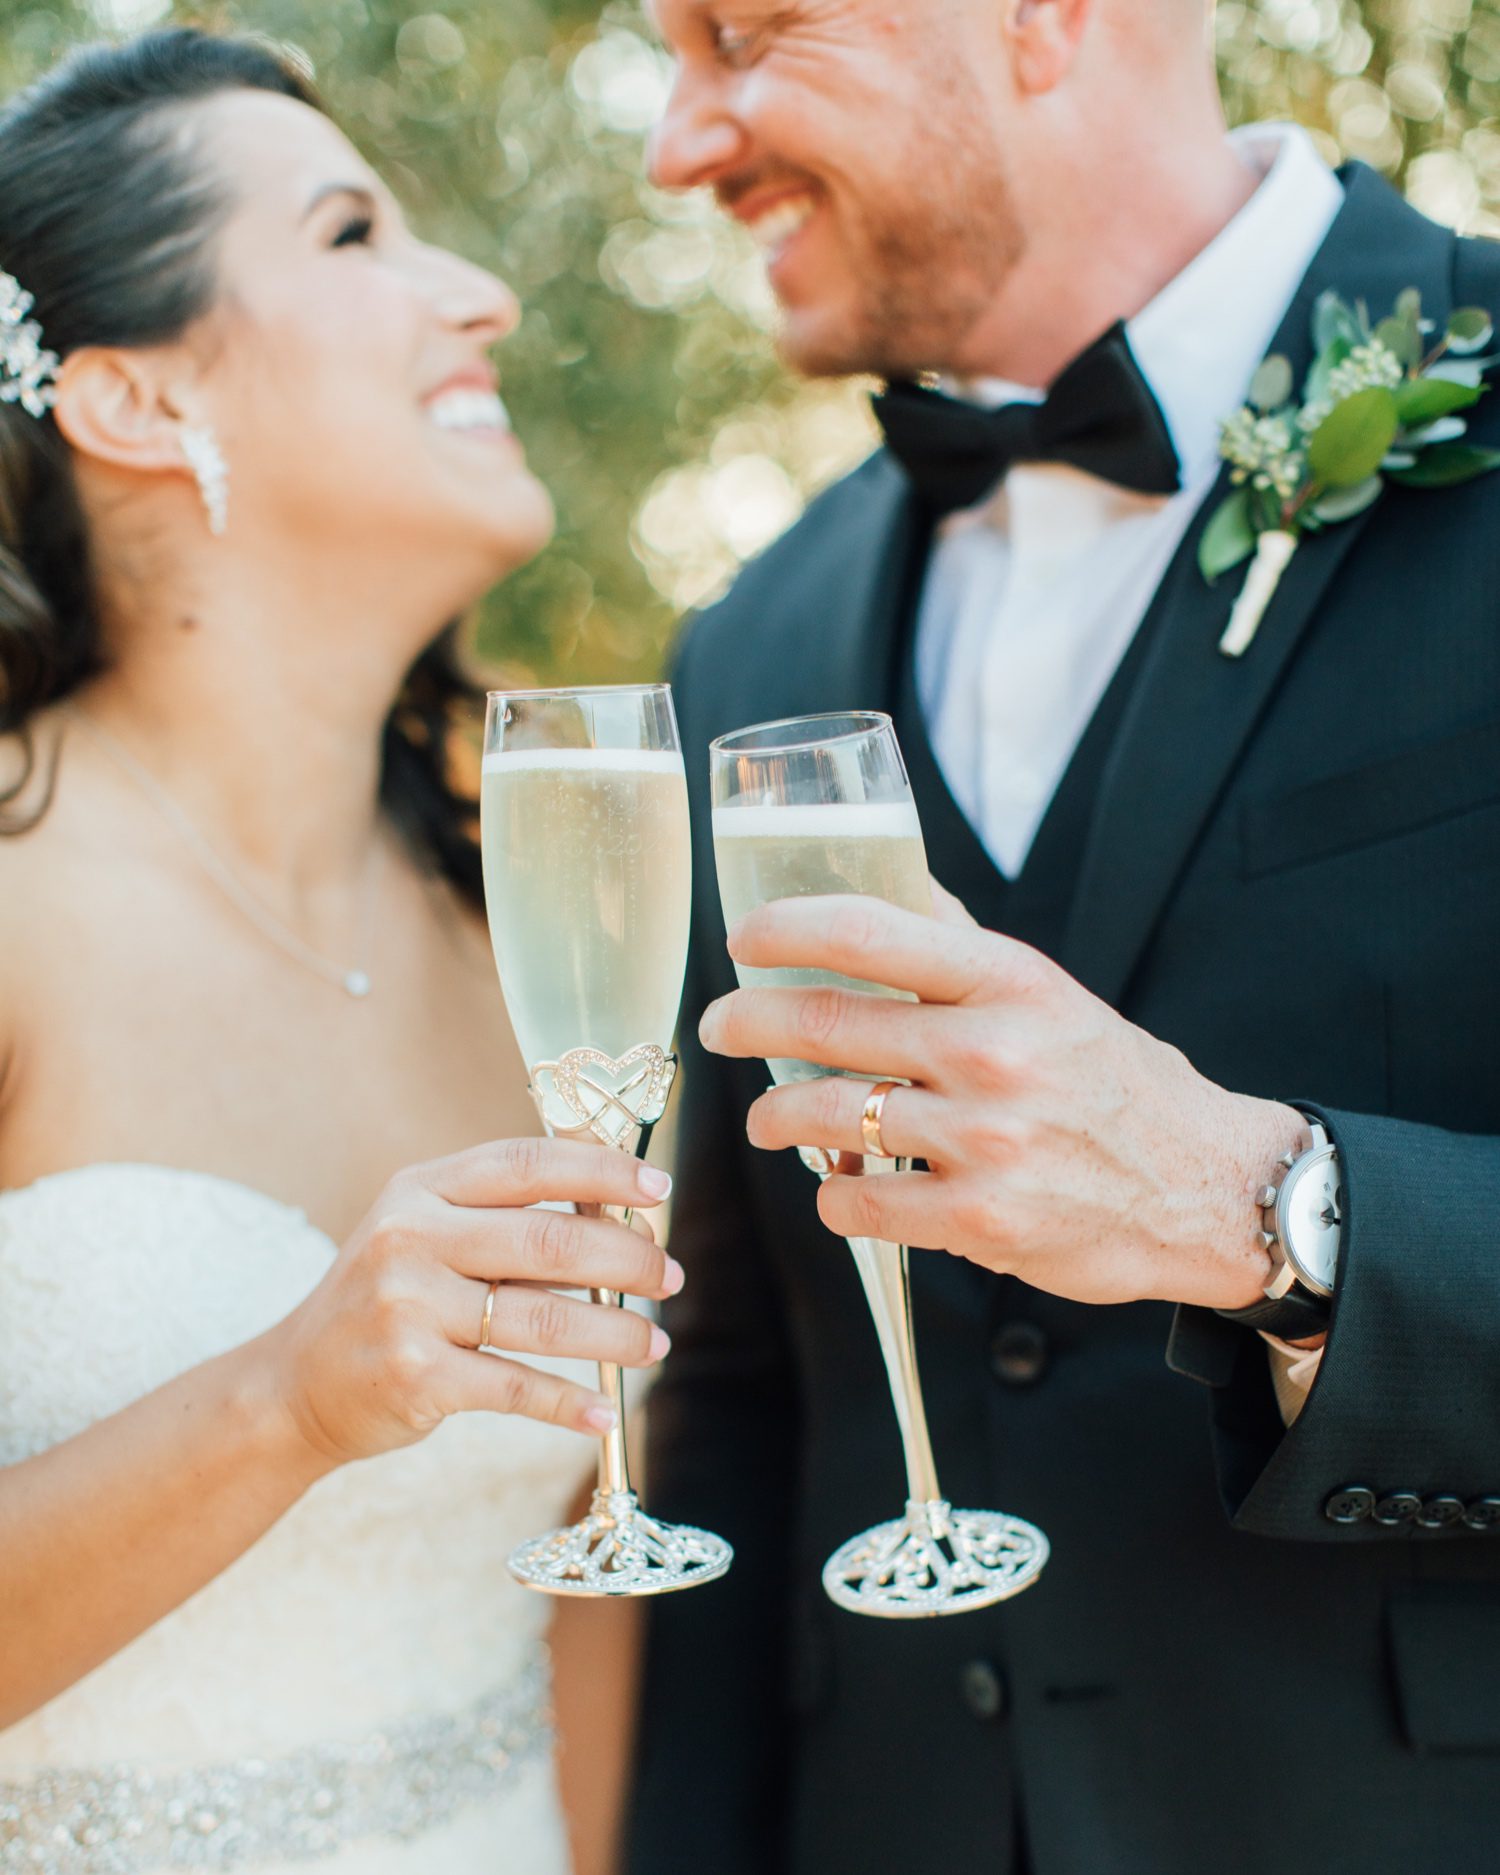 Bride and Groom toasting champagne at Paso robles wine country wedding venue Aterno Estate by jessica sofranko